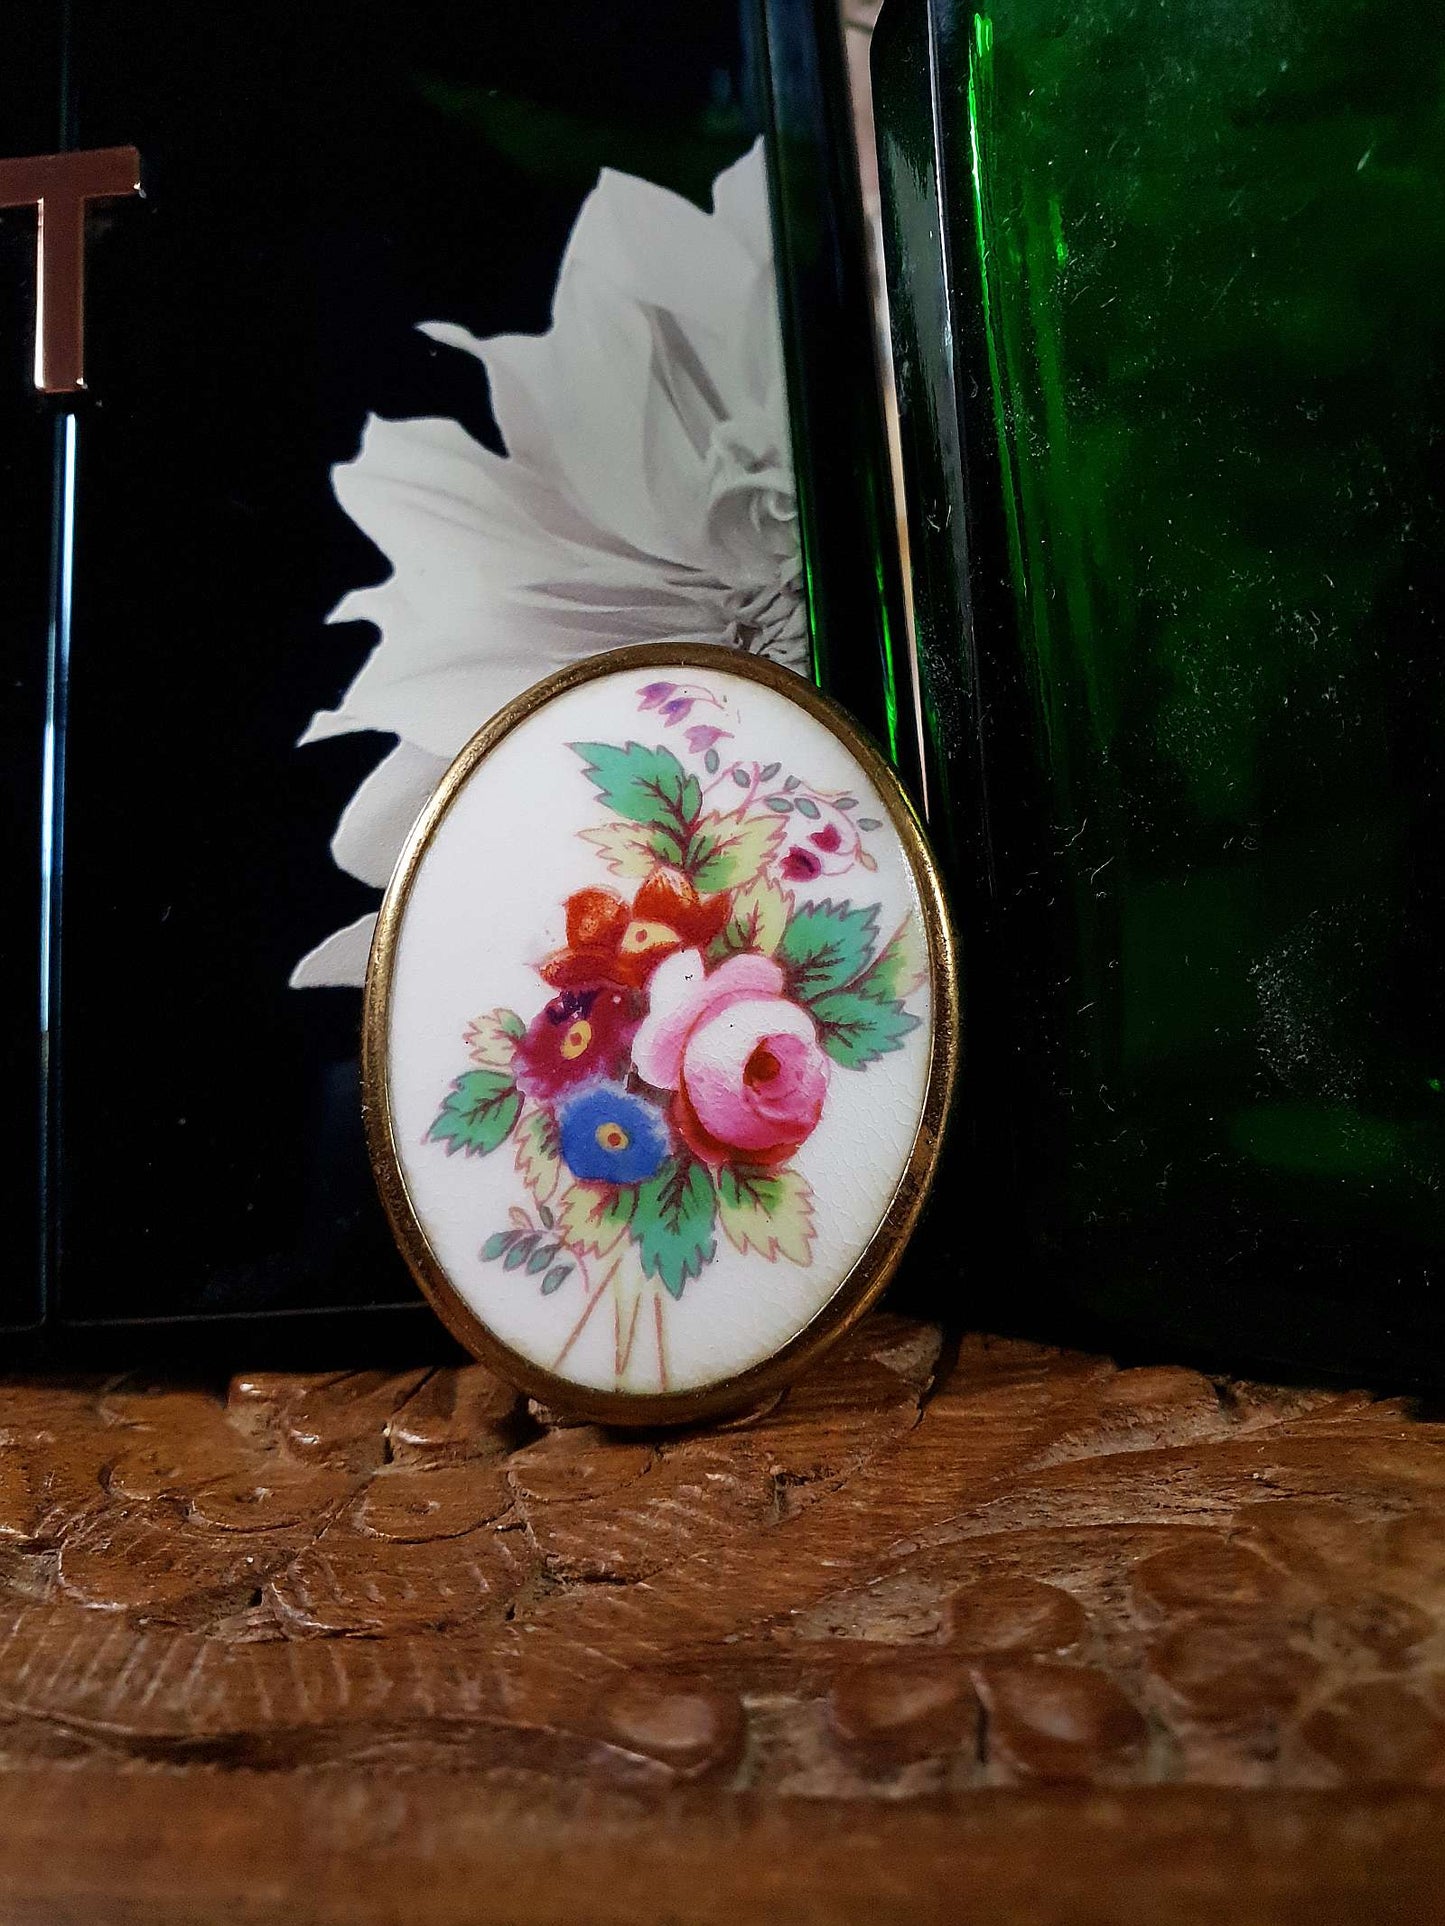 Vintage Royal Worcester Flower Brooch Pin 1950s Bone China Floral Hand Painted